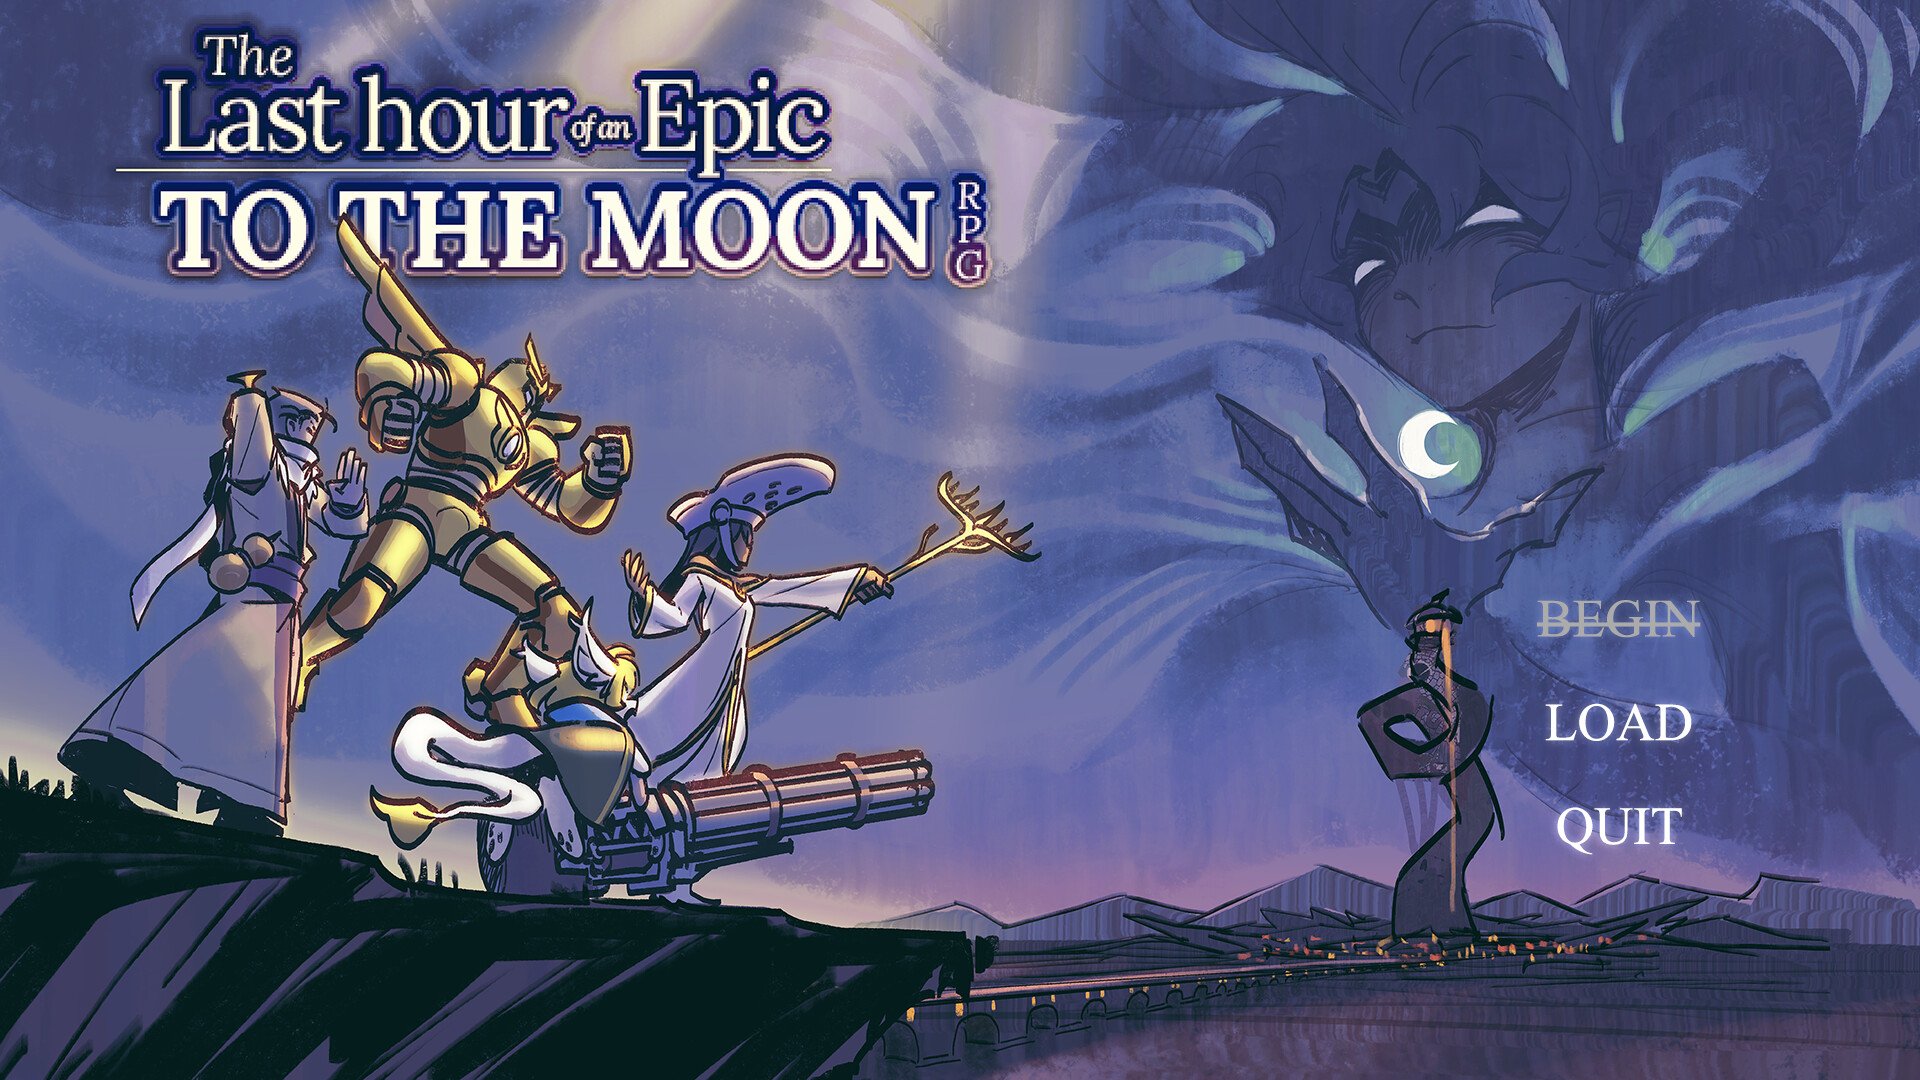 #In The Last Hour of an Epic TO THE MOON RPG sparen wir uns 99 Stunden Grinding